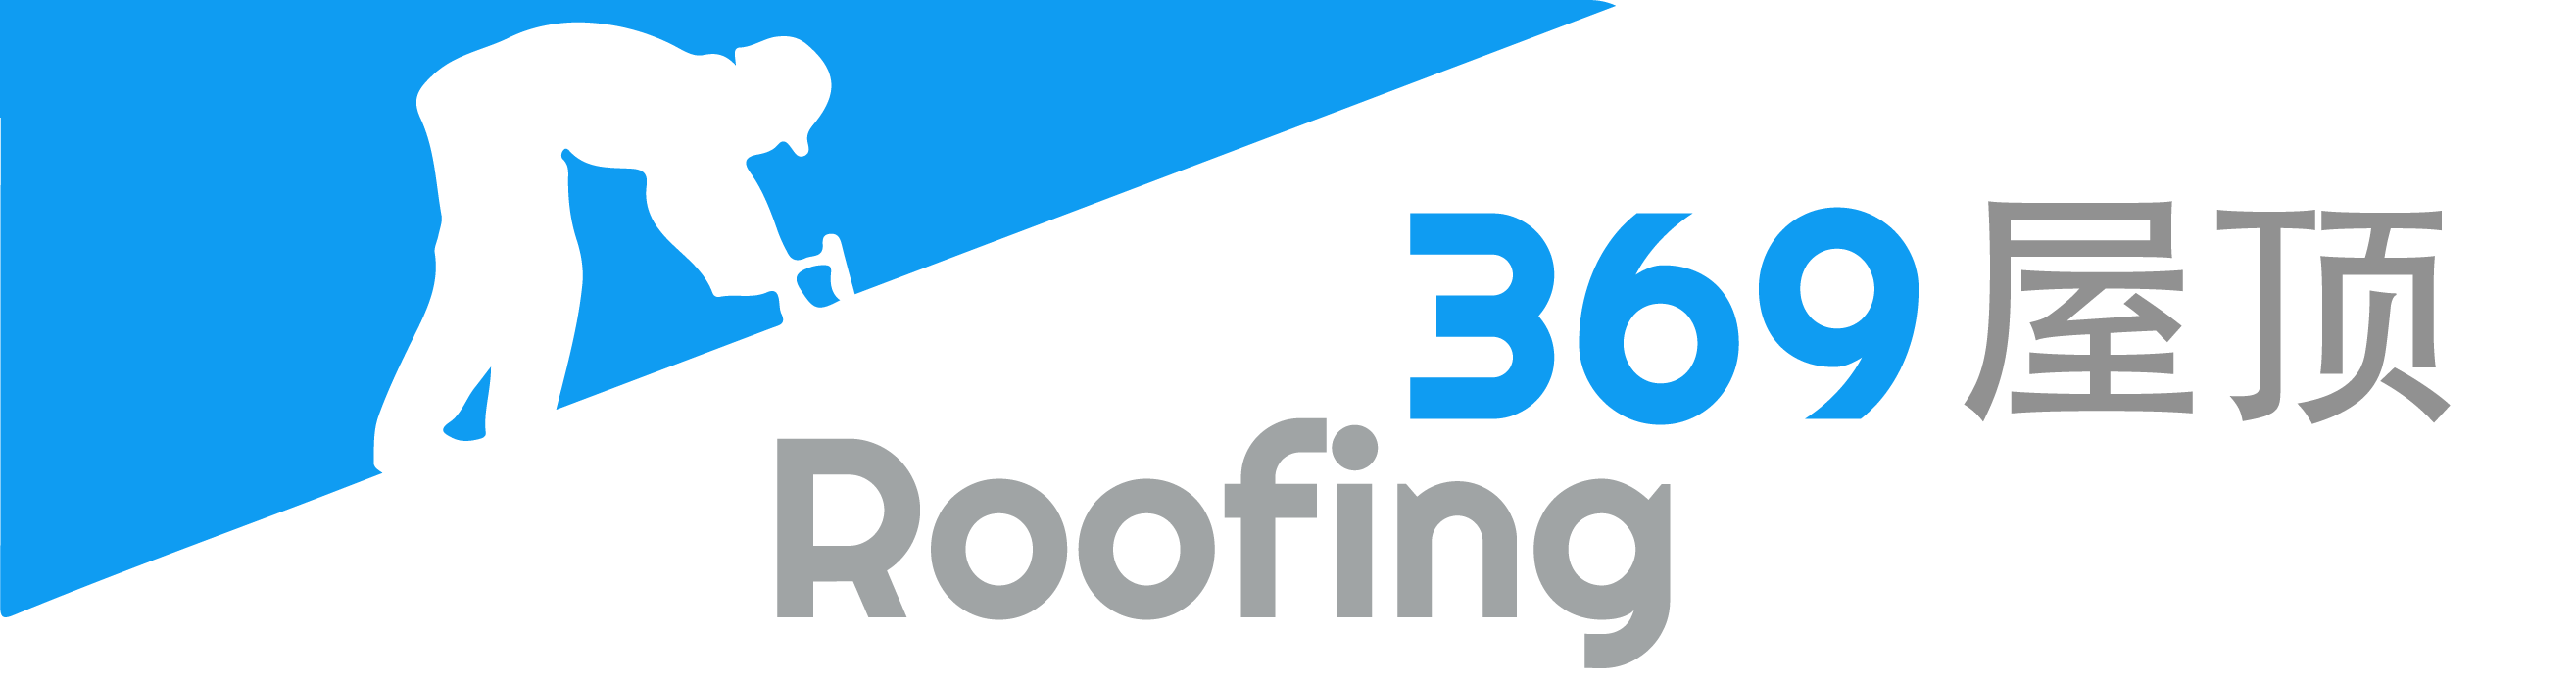 369-Roofing-Logo1000T